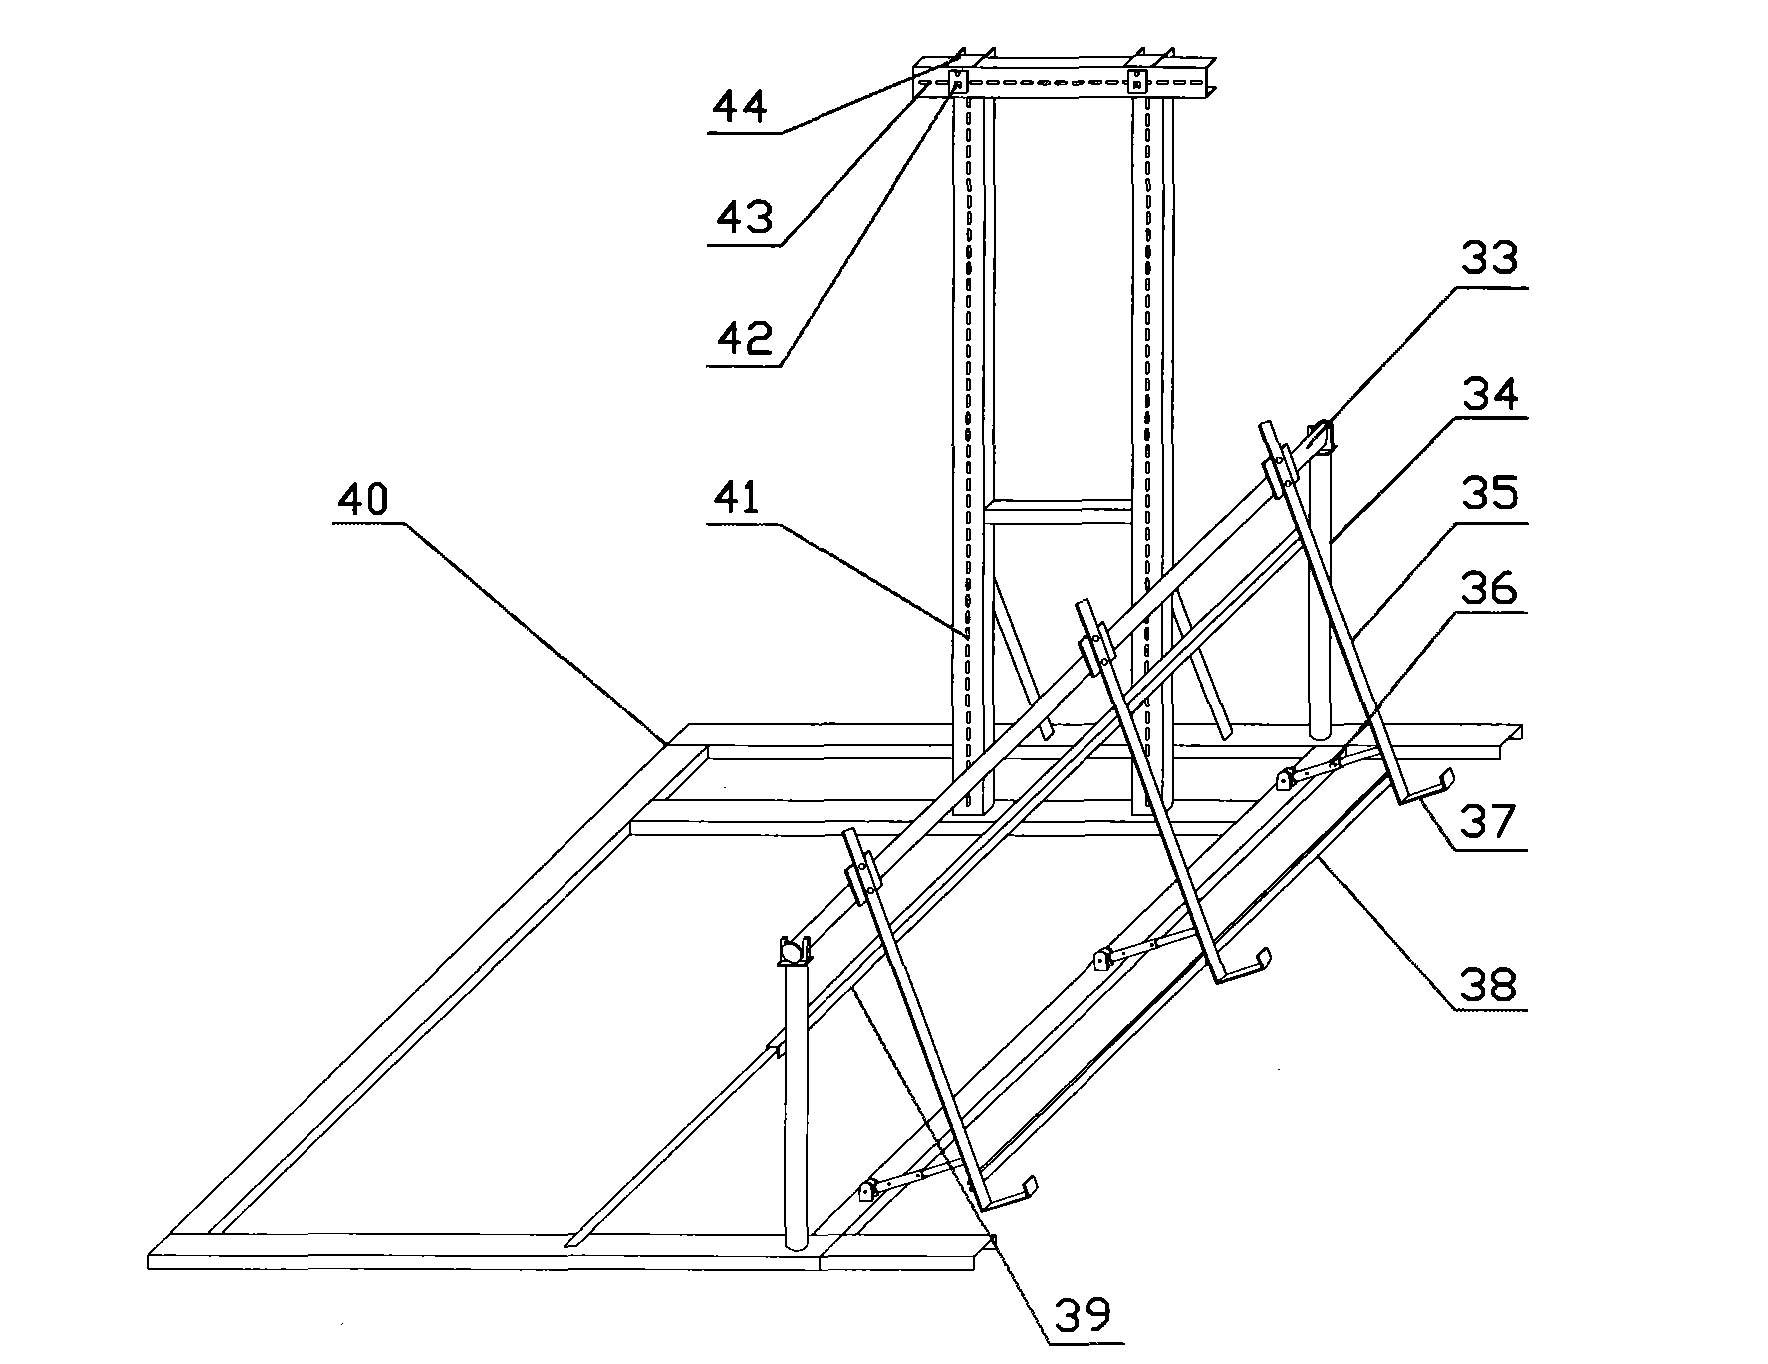 Thermal performance detection system and method for balcony wall-mounted solar water heater